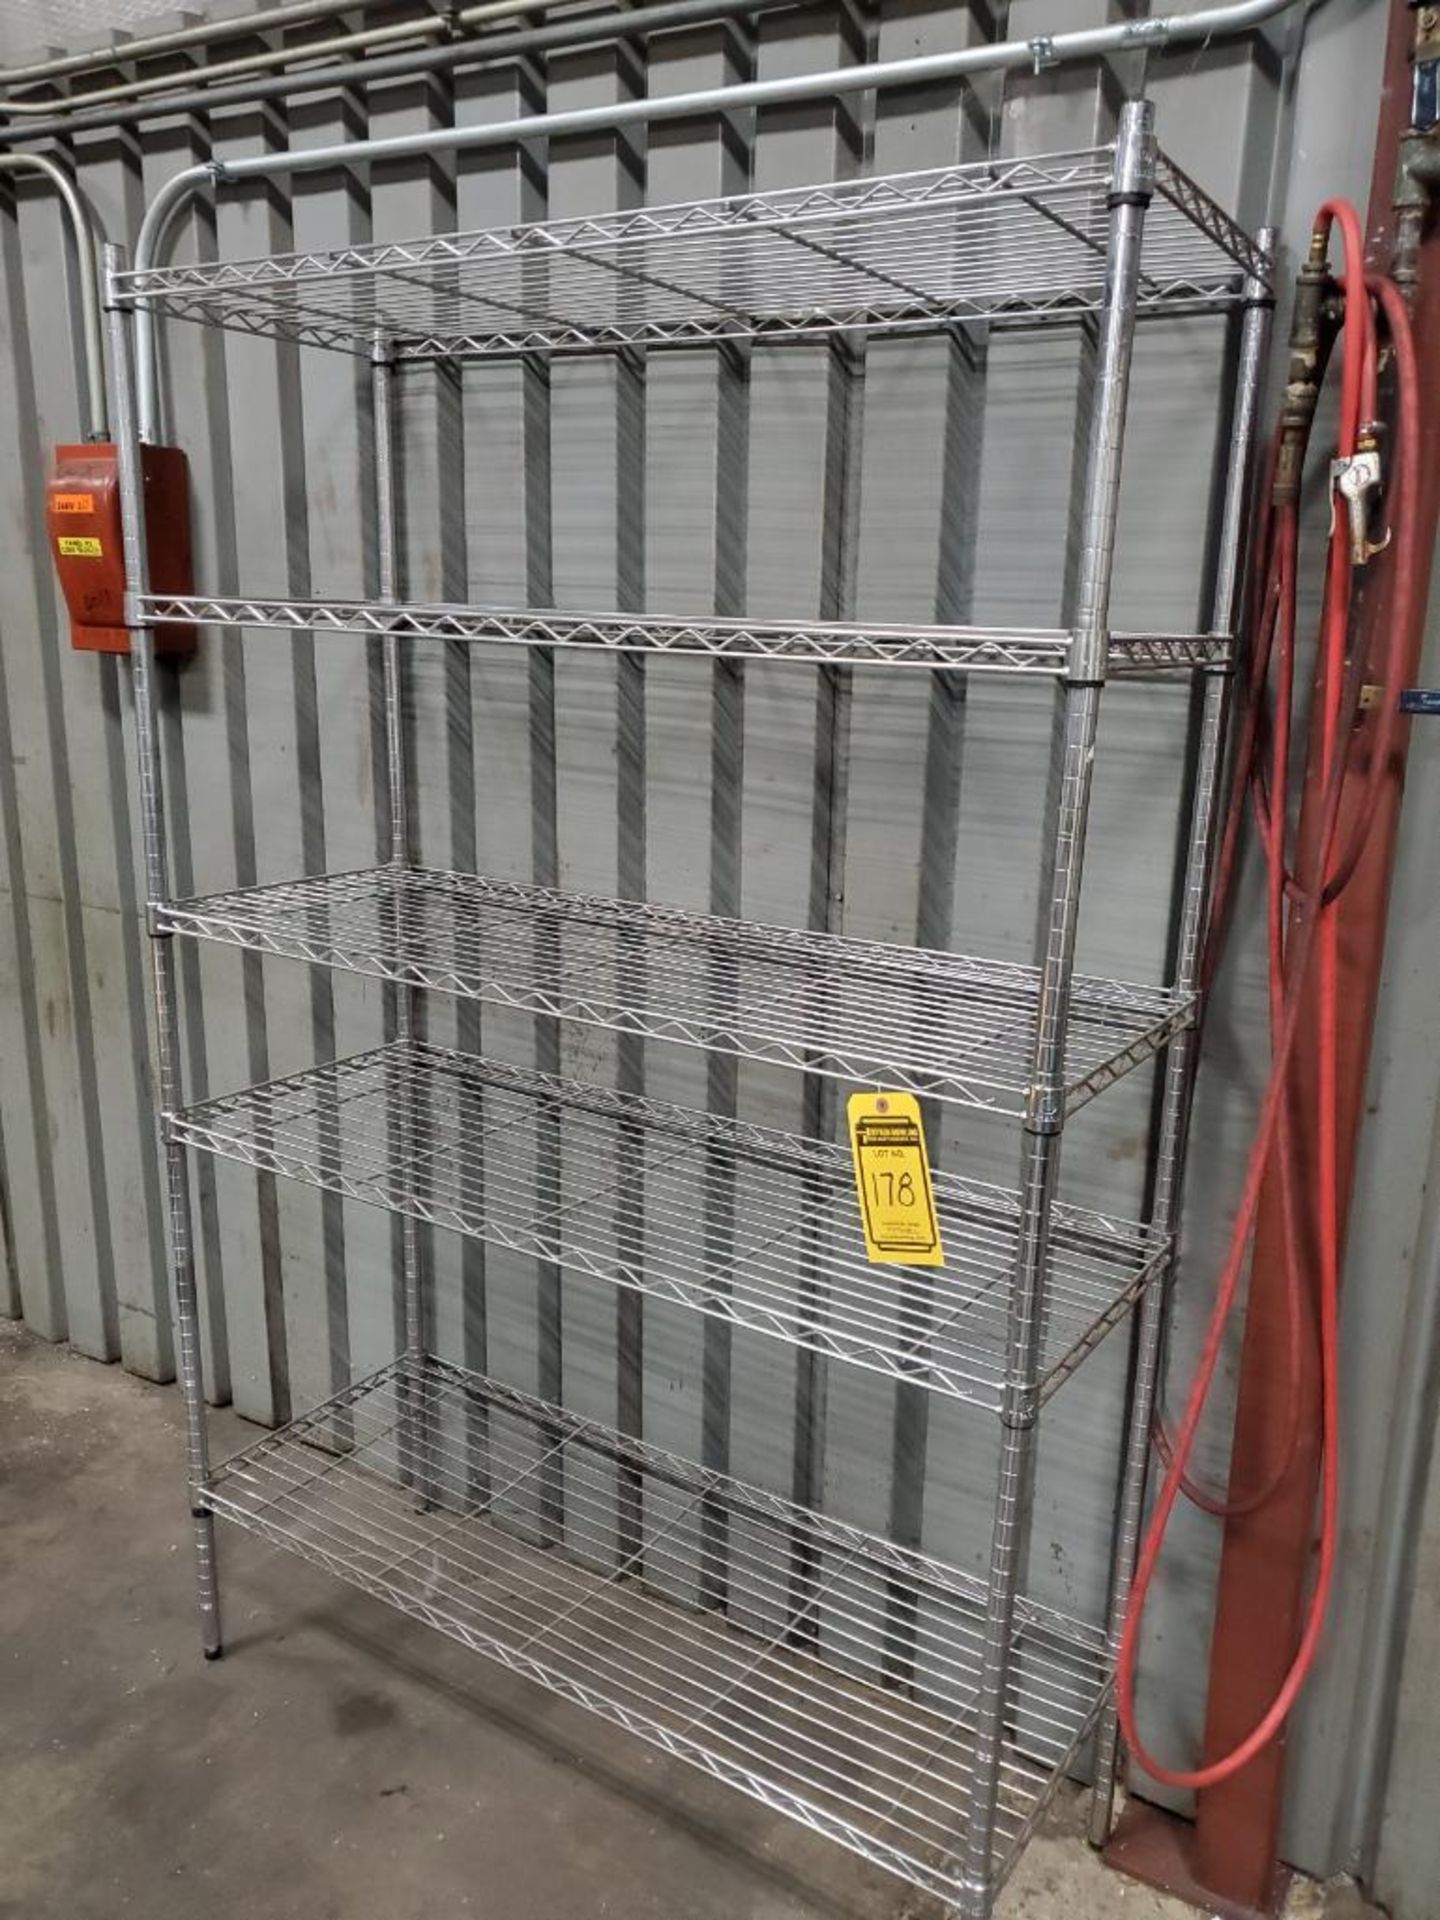 STEEL RACK W/ CONTENTS INCLUDING: PRECISION MACHINING JIGS & FIXTURES, ANGLE BLOCK, & MORE - Image 6 of 14